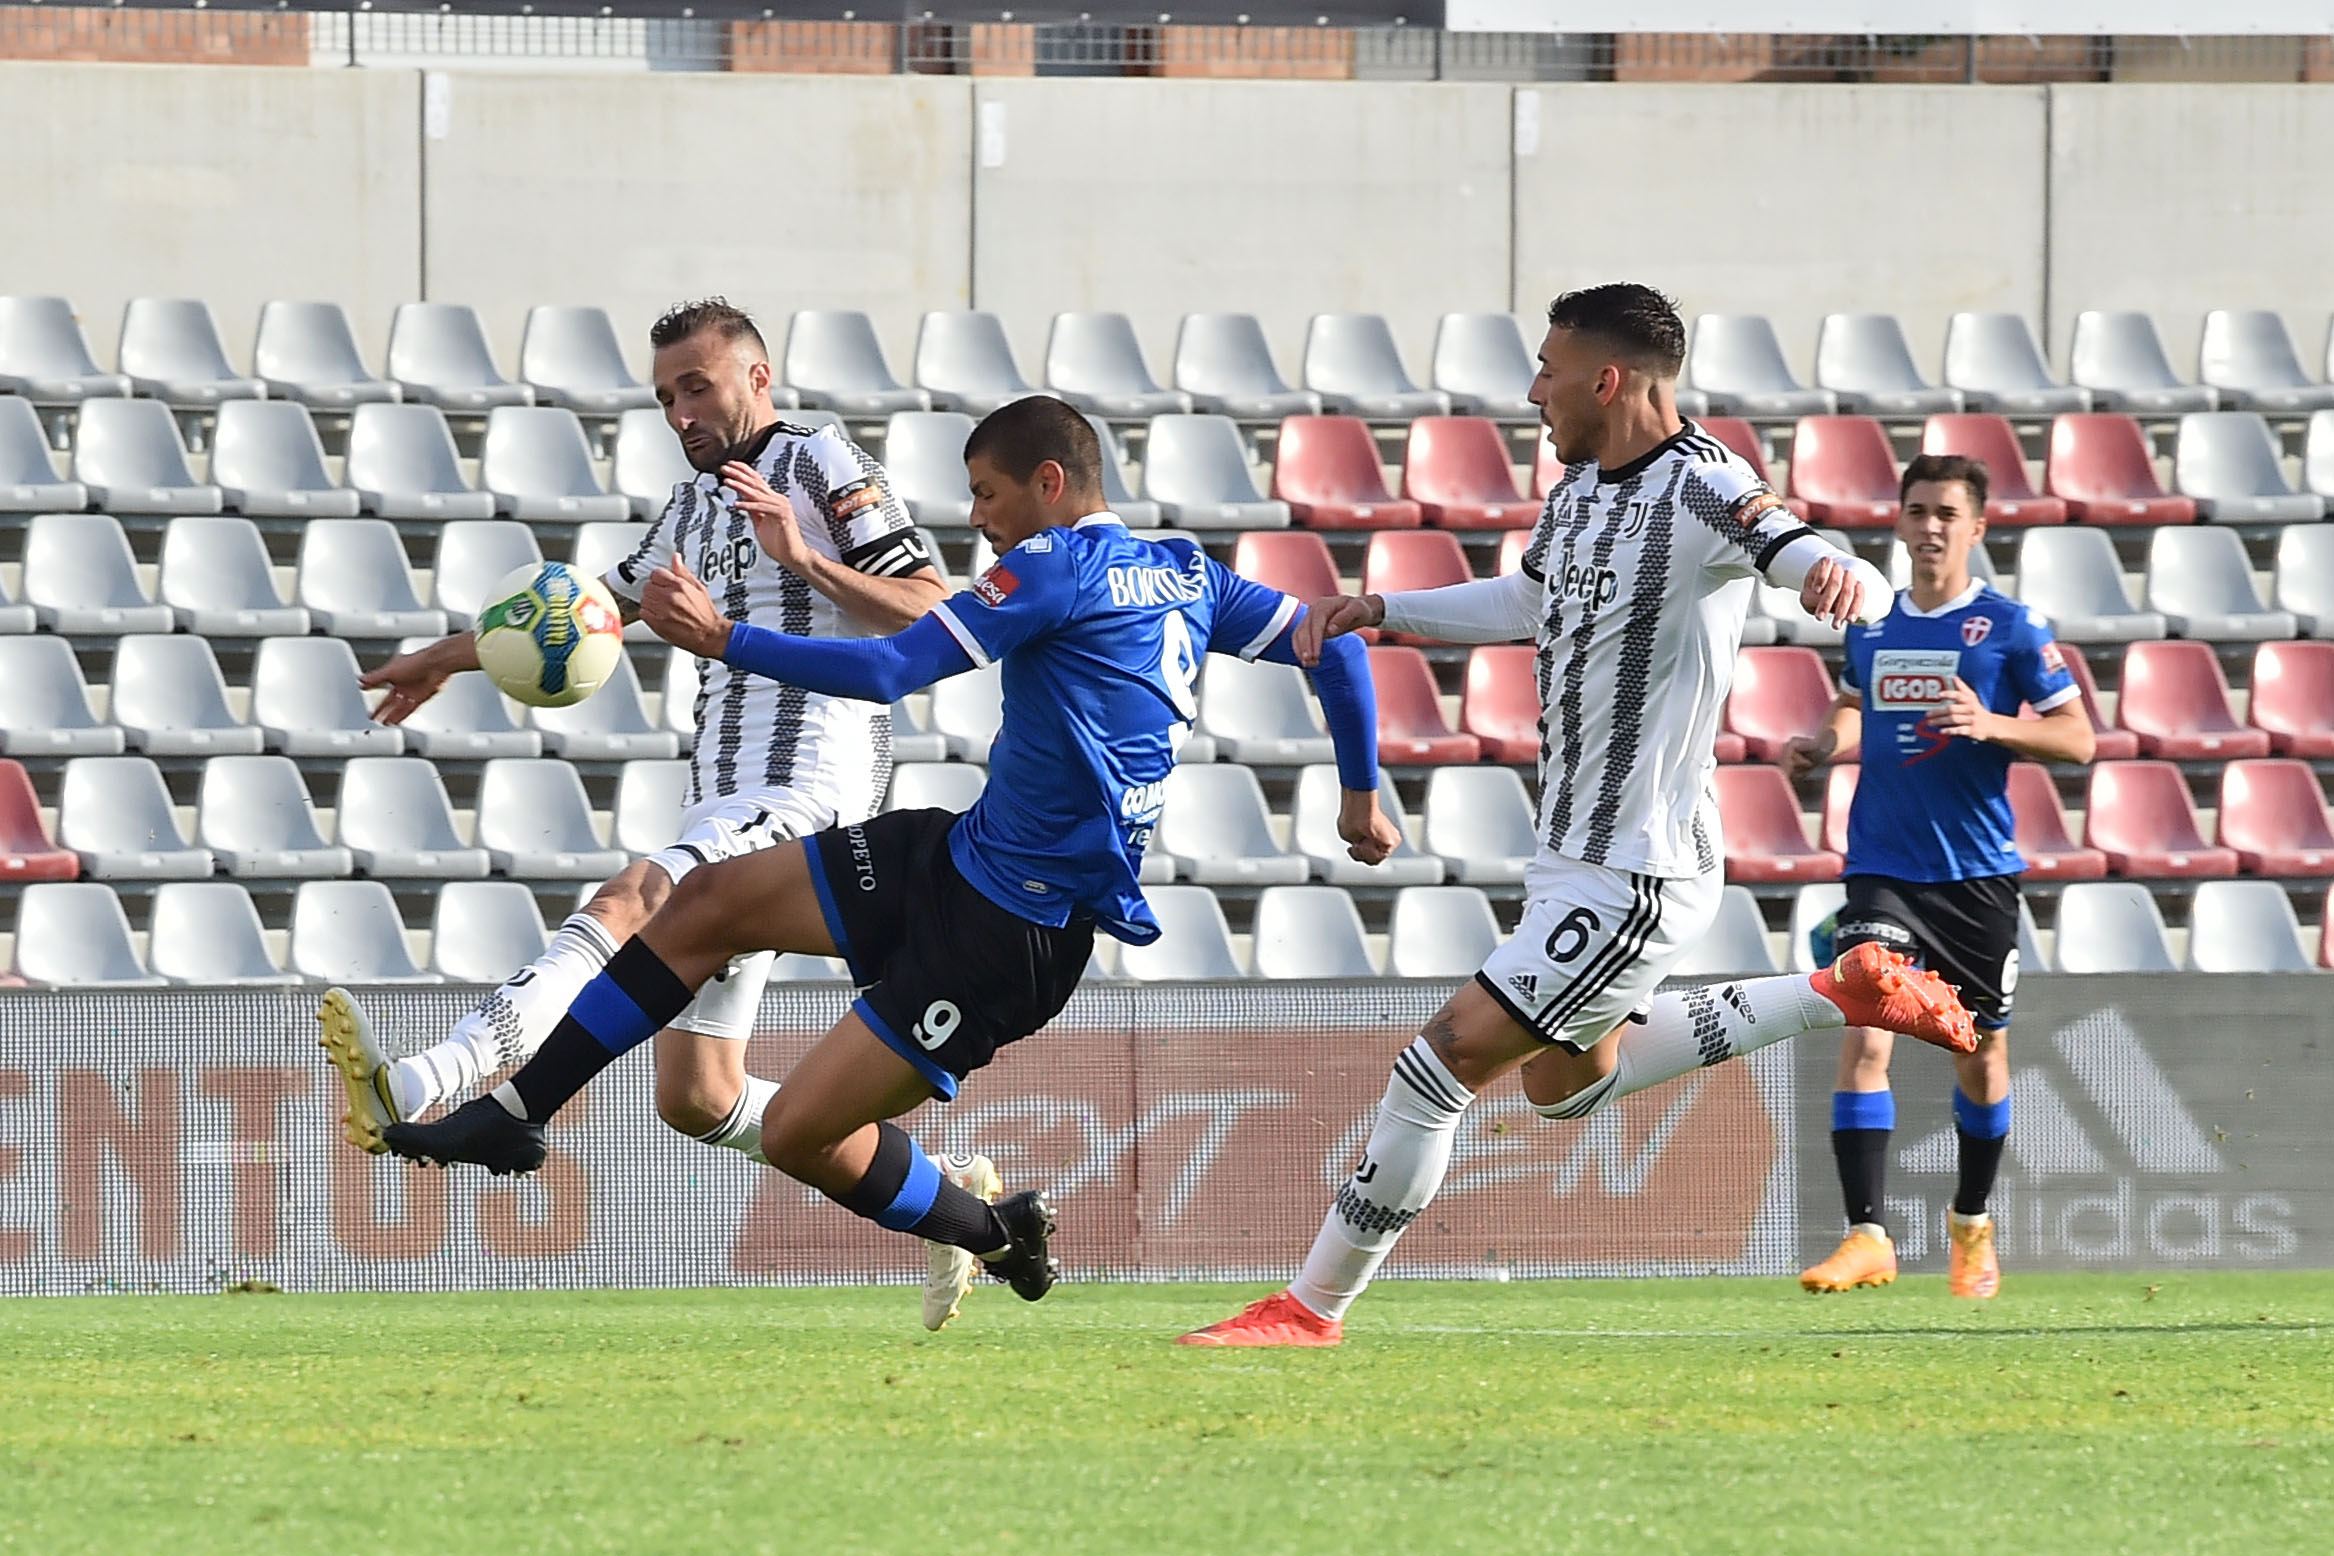 Read more about the article Juventus Next Gen-Novara 2-1 | Il tabellino del match